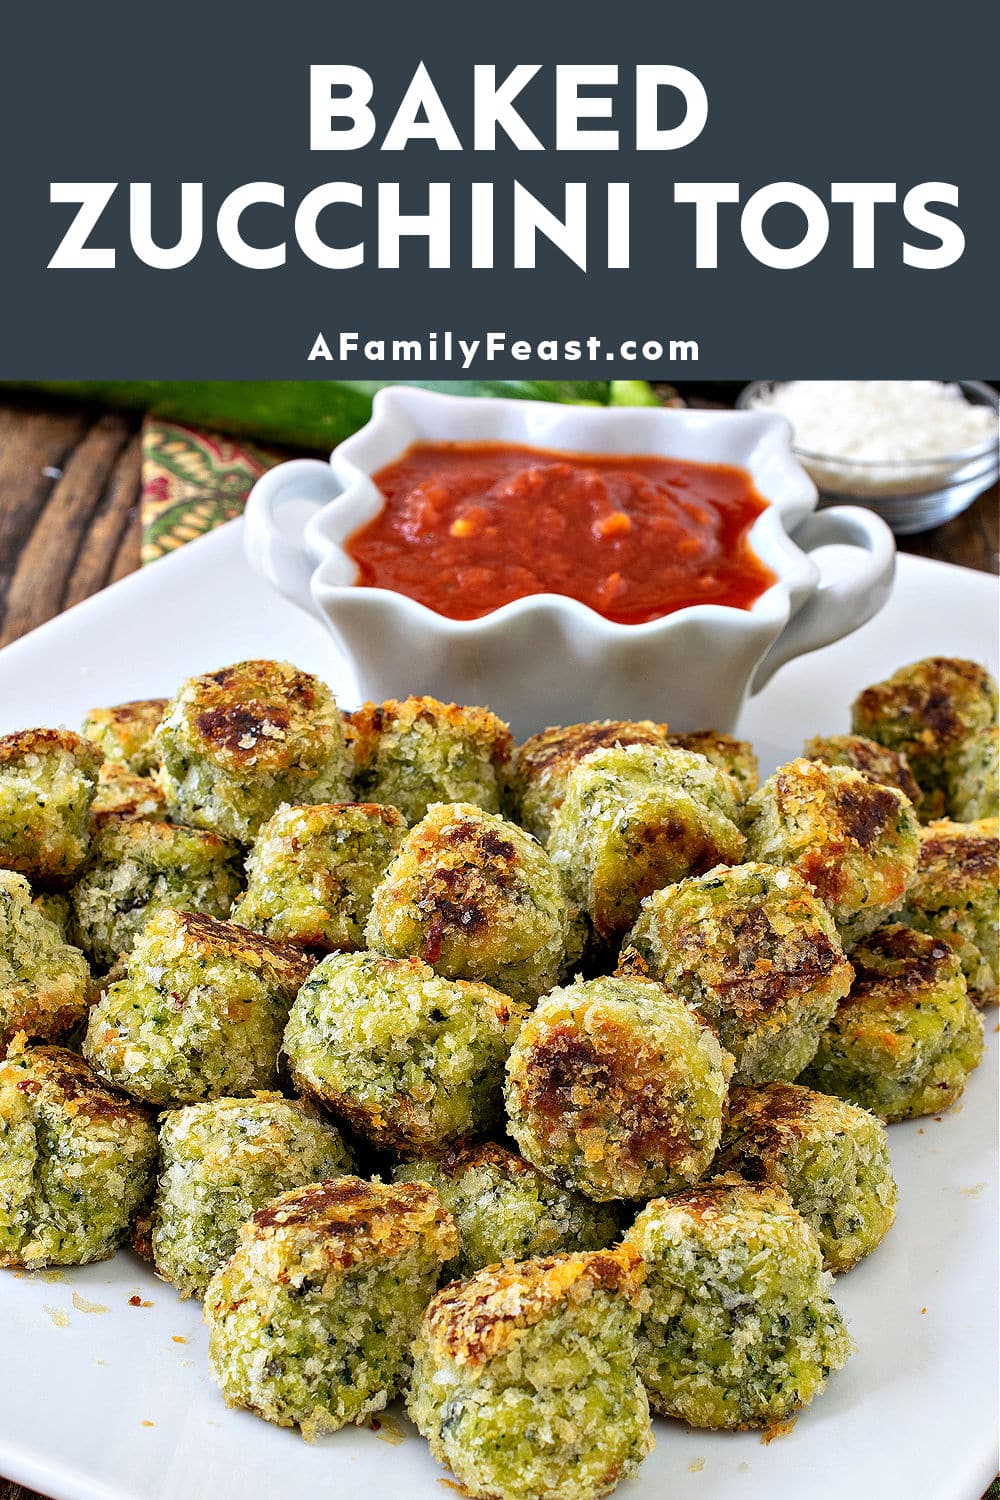 Baked Zucchini Tots - A Family Feast